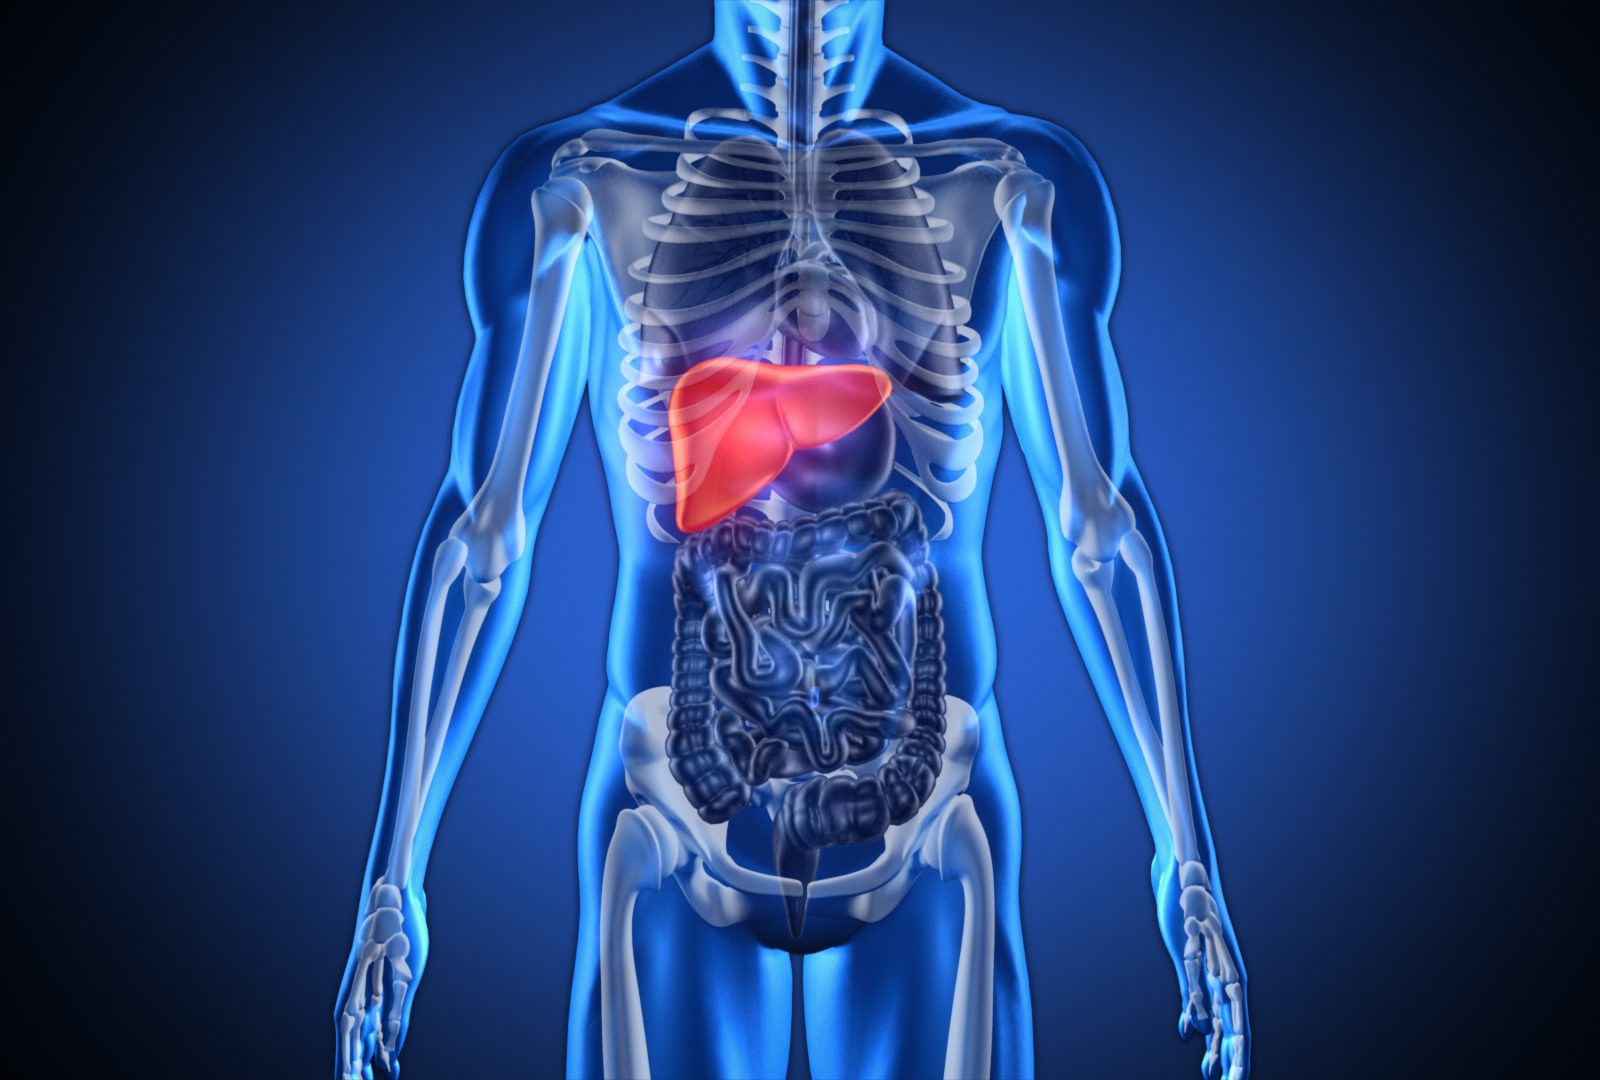 The Liver Is The Only Organ In The Human Body That Can Regenerate